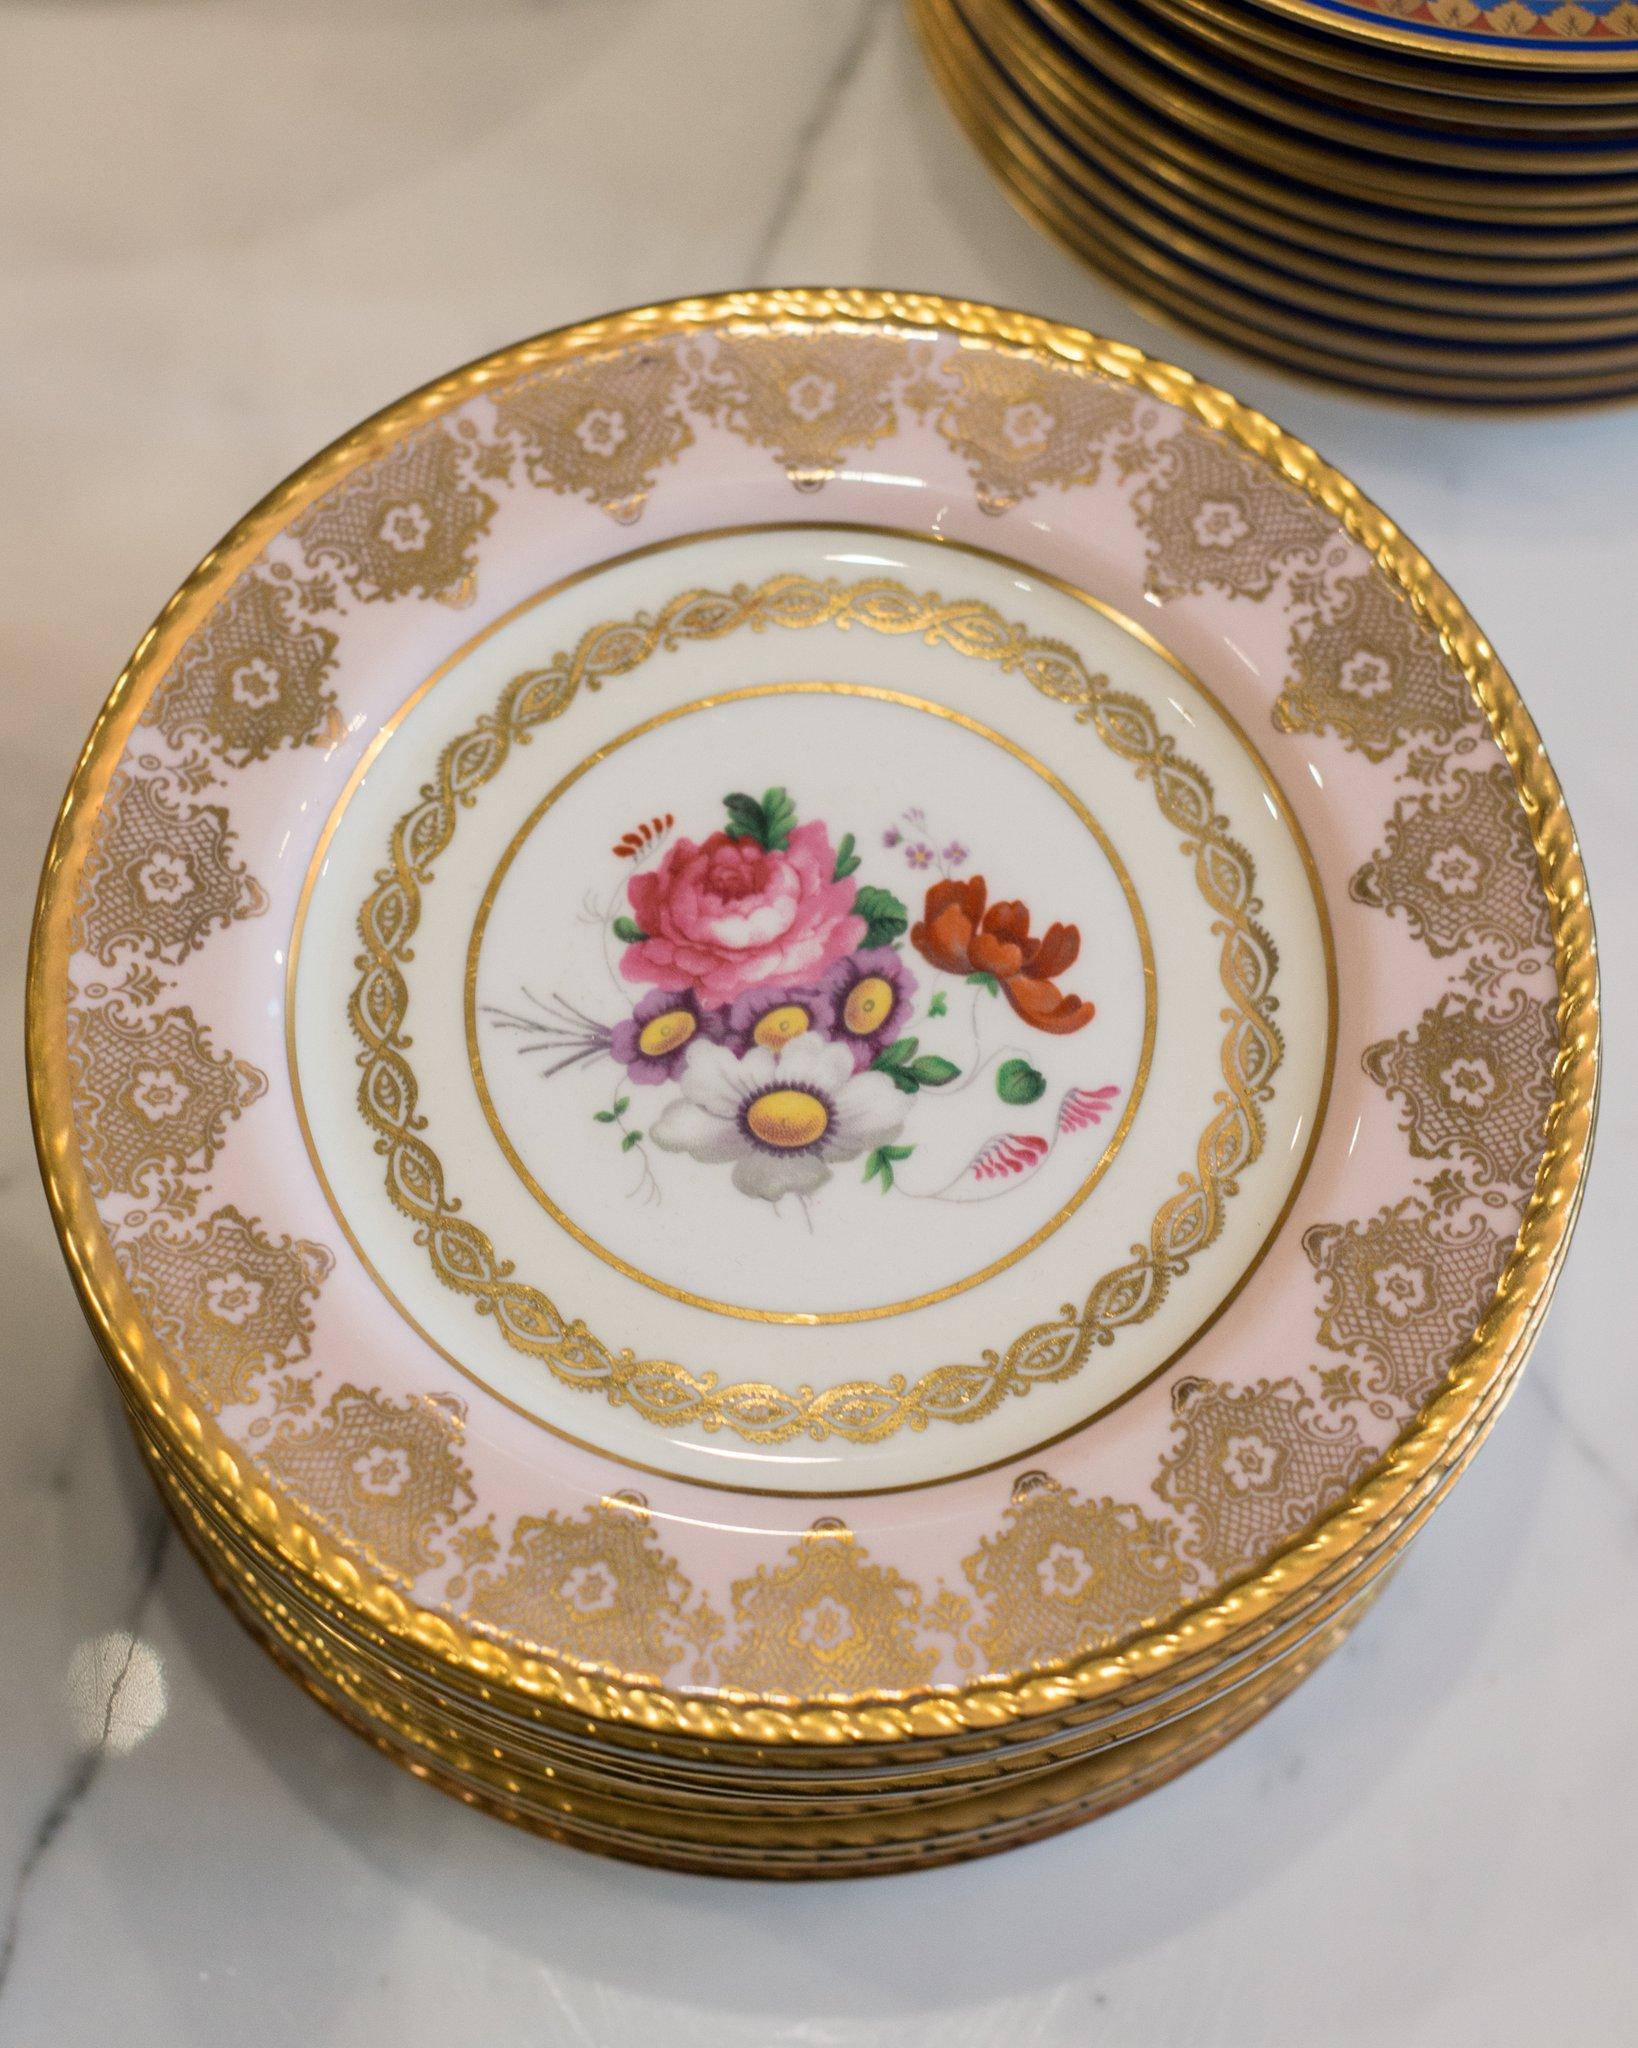 A set of 15 Antique Paragon pink and gold dessert plates, produced in England between 1945-1955. Delicately painted and ornately gilt, the soft pink colour is sure to delight.

The Paragon China Company was a British manufacturer of bone china